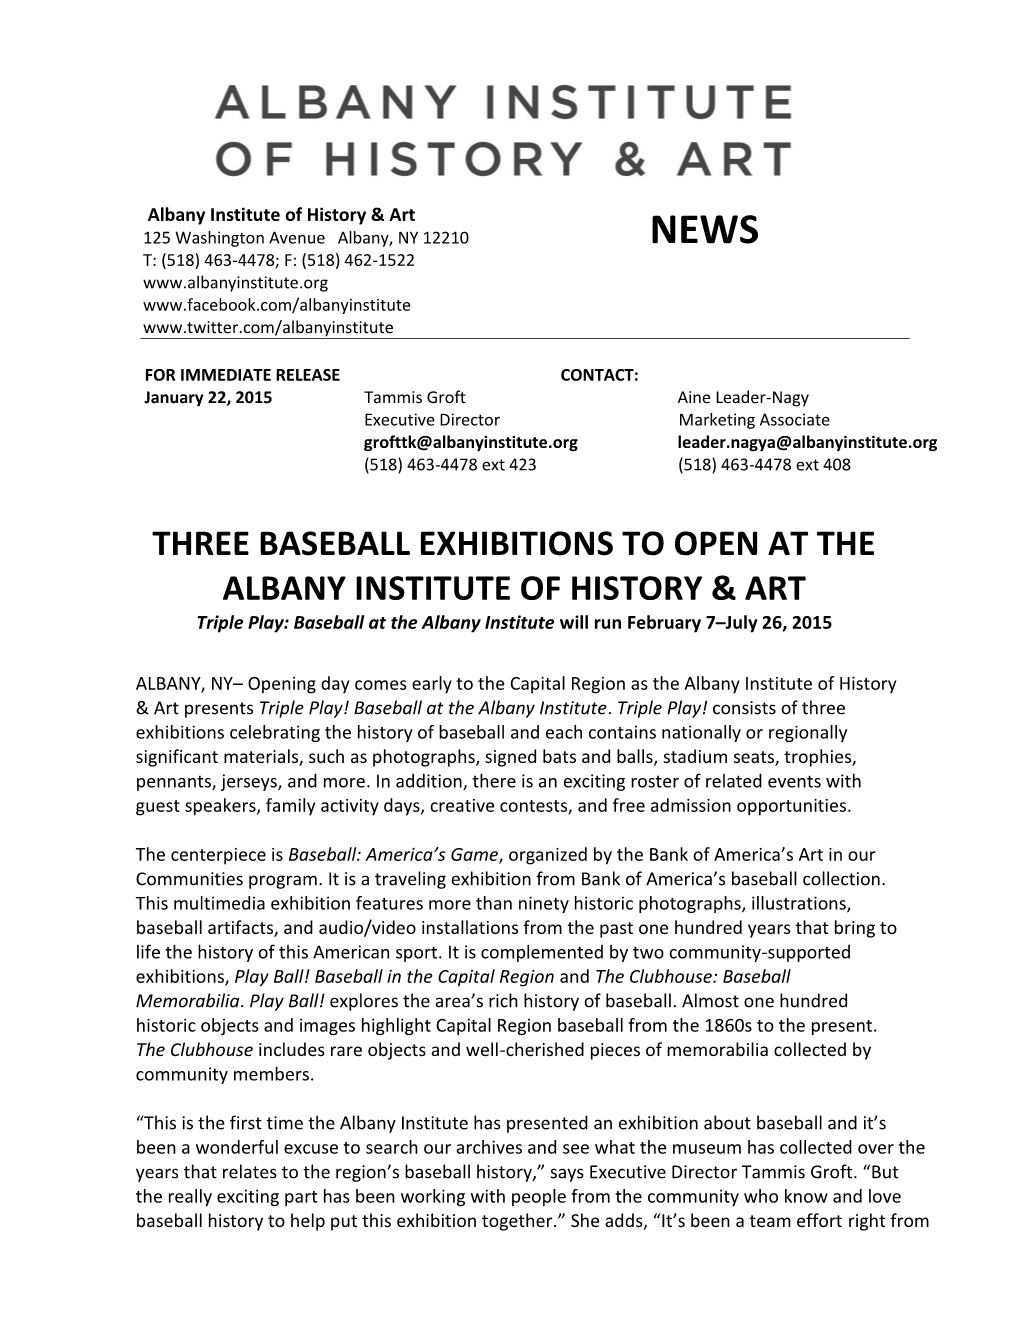 Three Baseball Exhibitions to Open at the Albany Institute of History &